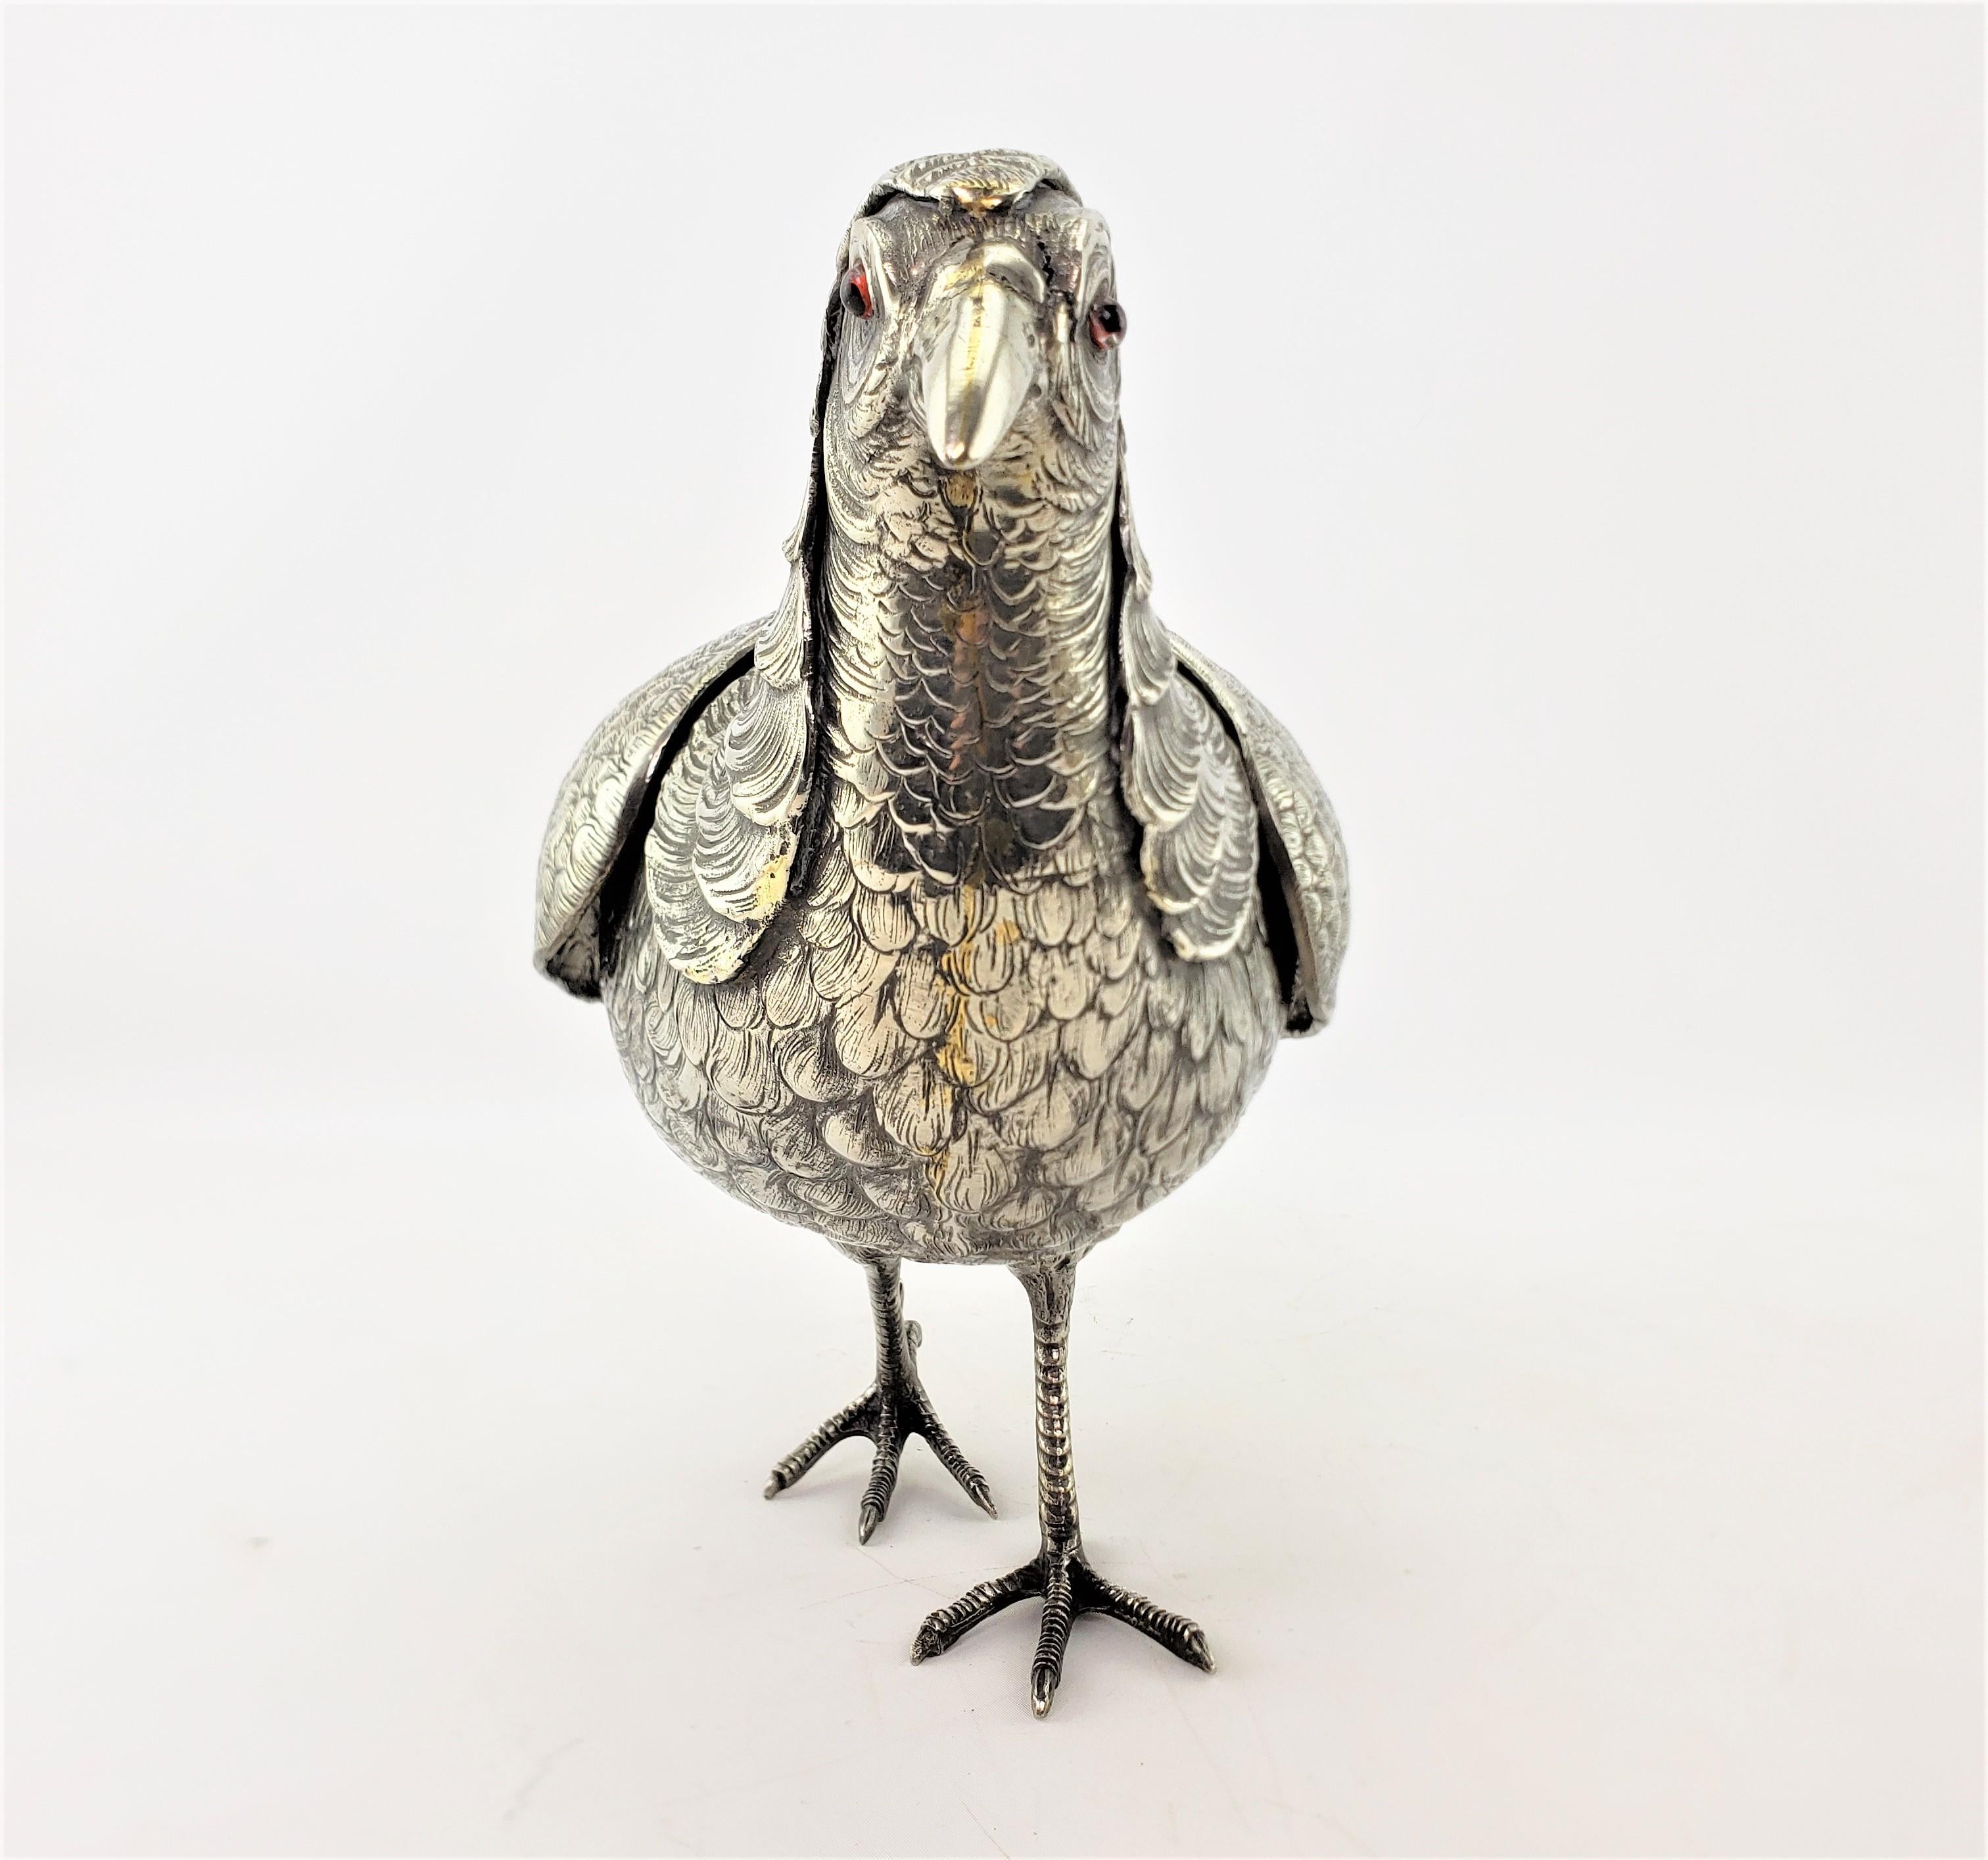 Pair of Large Antique Silver Plated Pheasant Sculptures with Articulated Wings For Sale 3